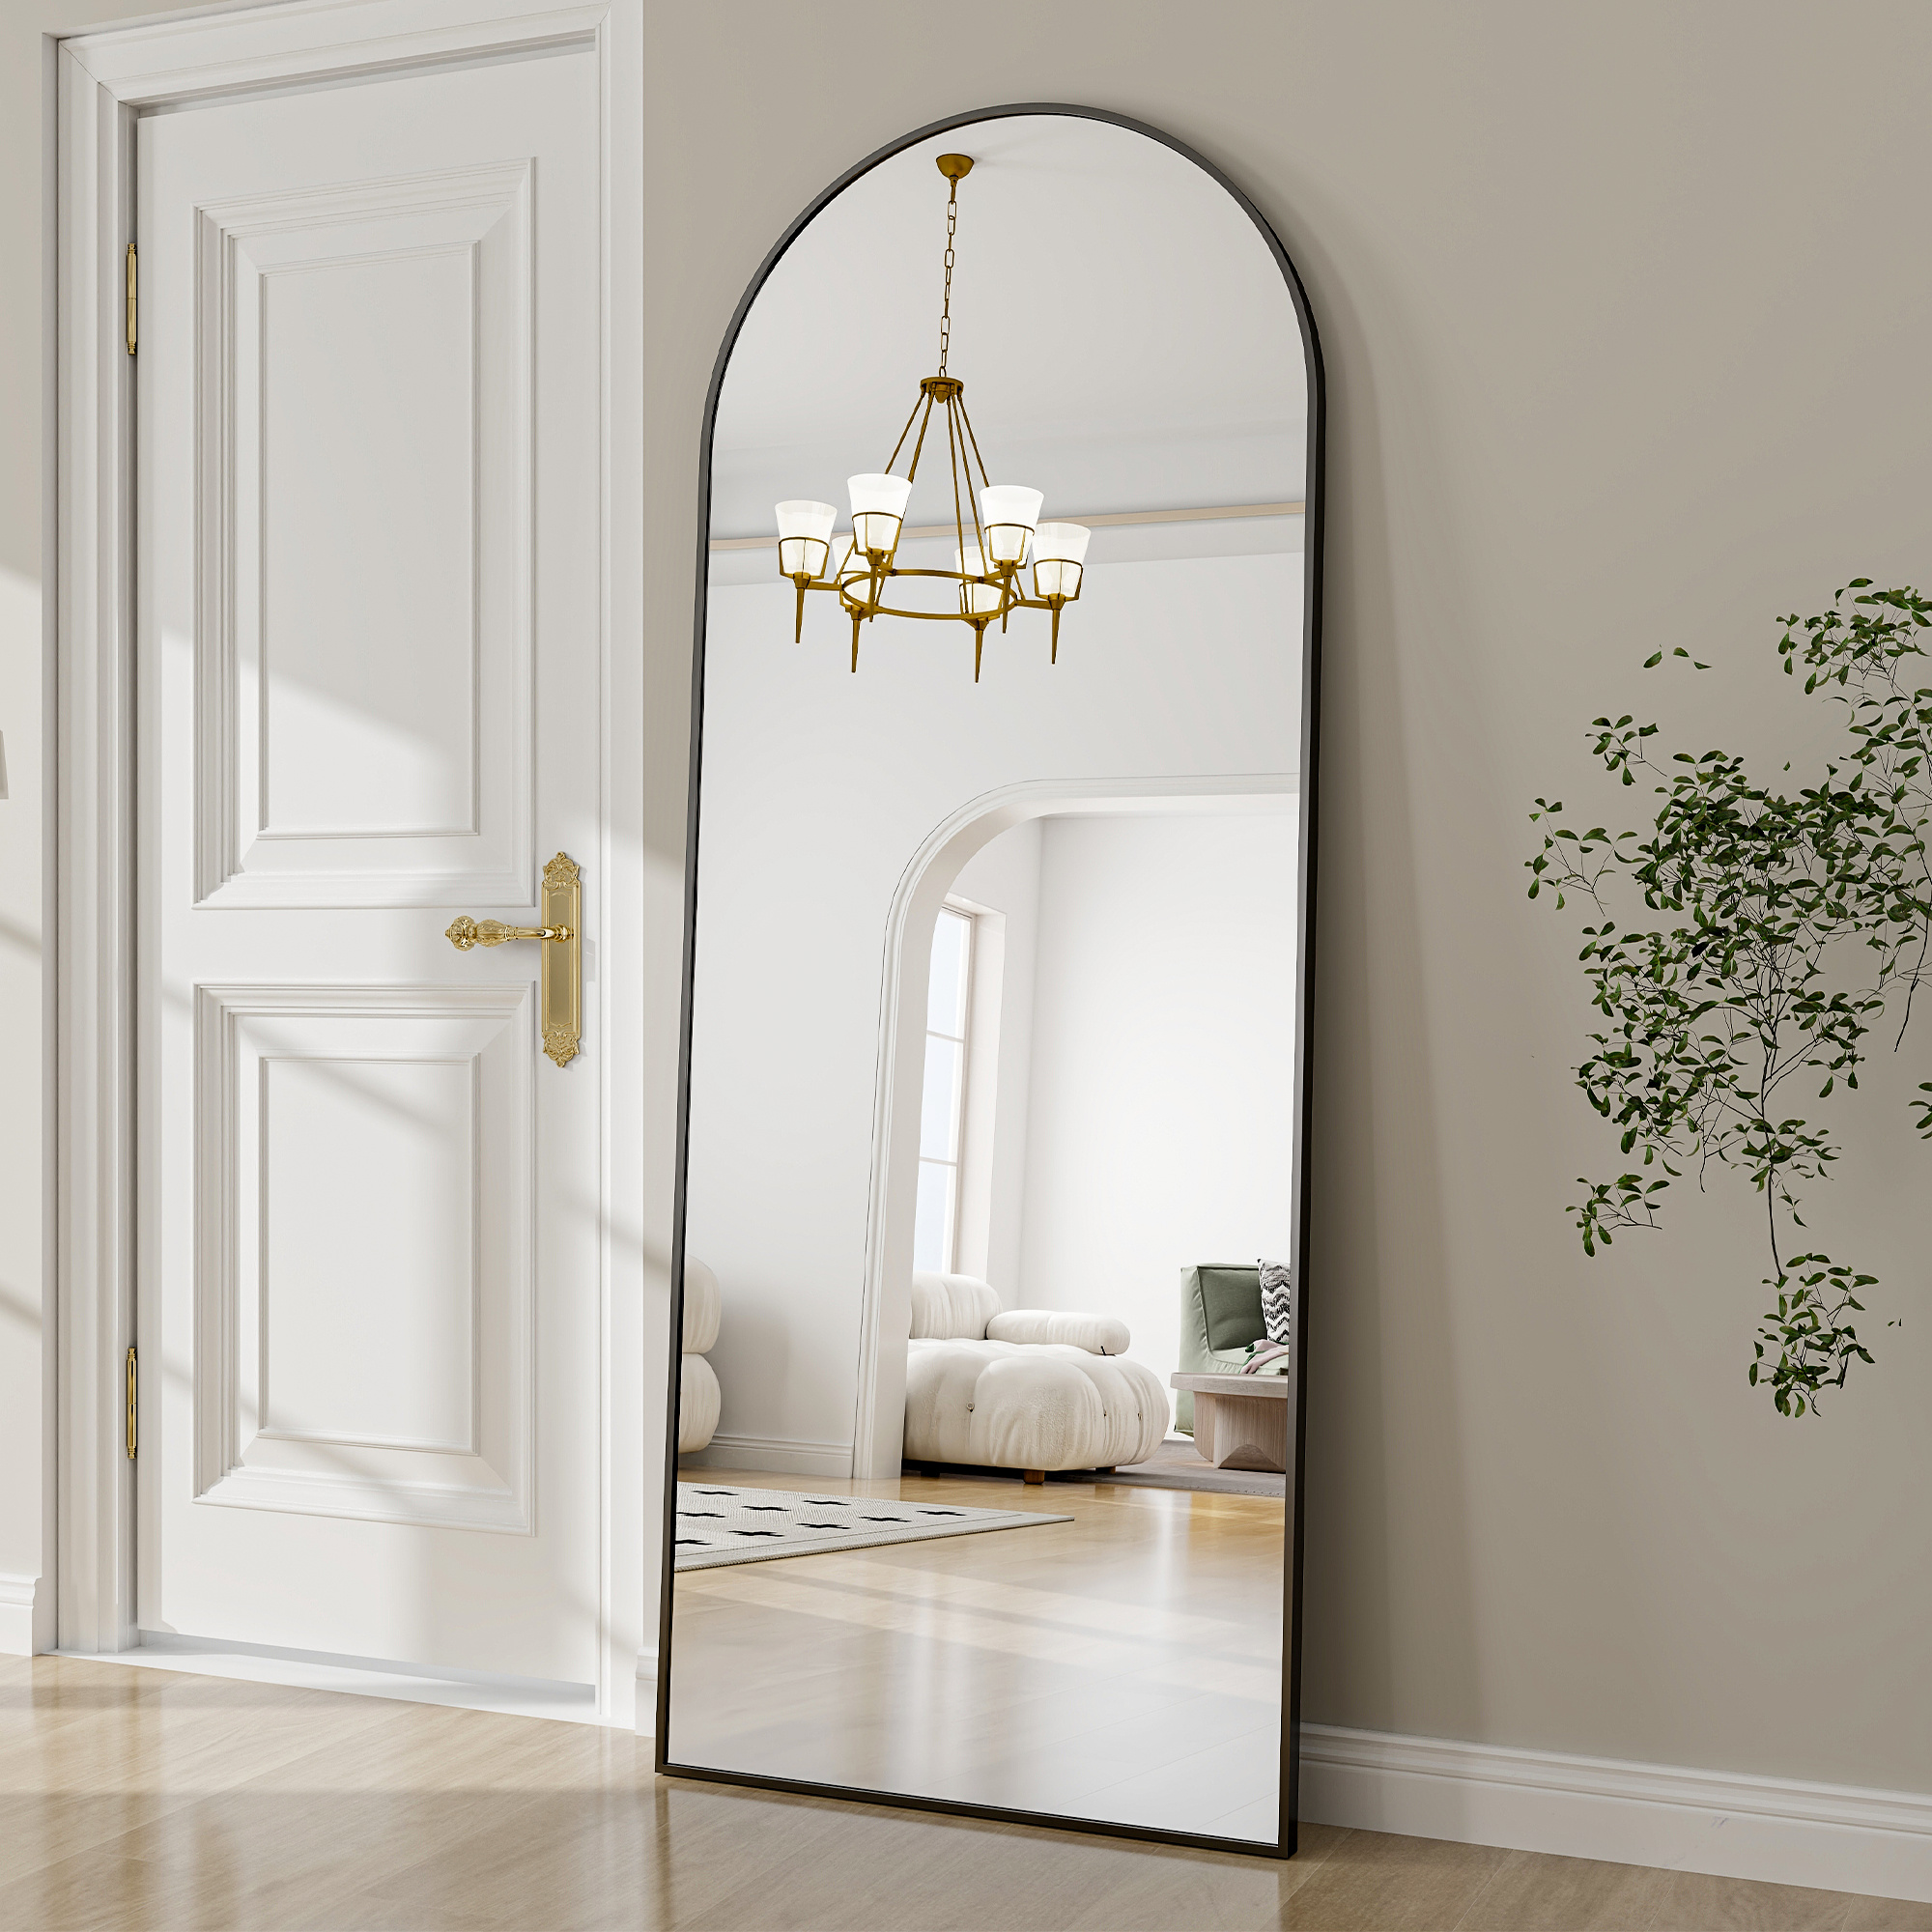 

64"x21" Arch Full Length Mirror, Wall Mirror Floor Mirror With Stand Hanging Or Leaning, Aluminum Alloy Frame Full Body Mirror For Bedroom, Dressing Room, Gold/black